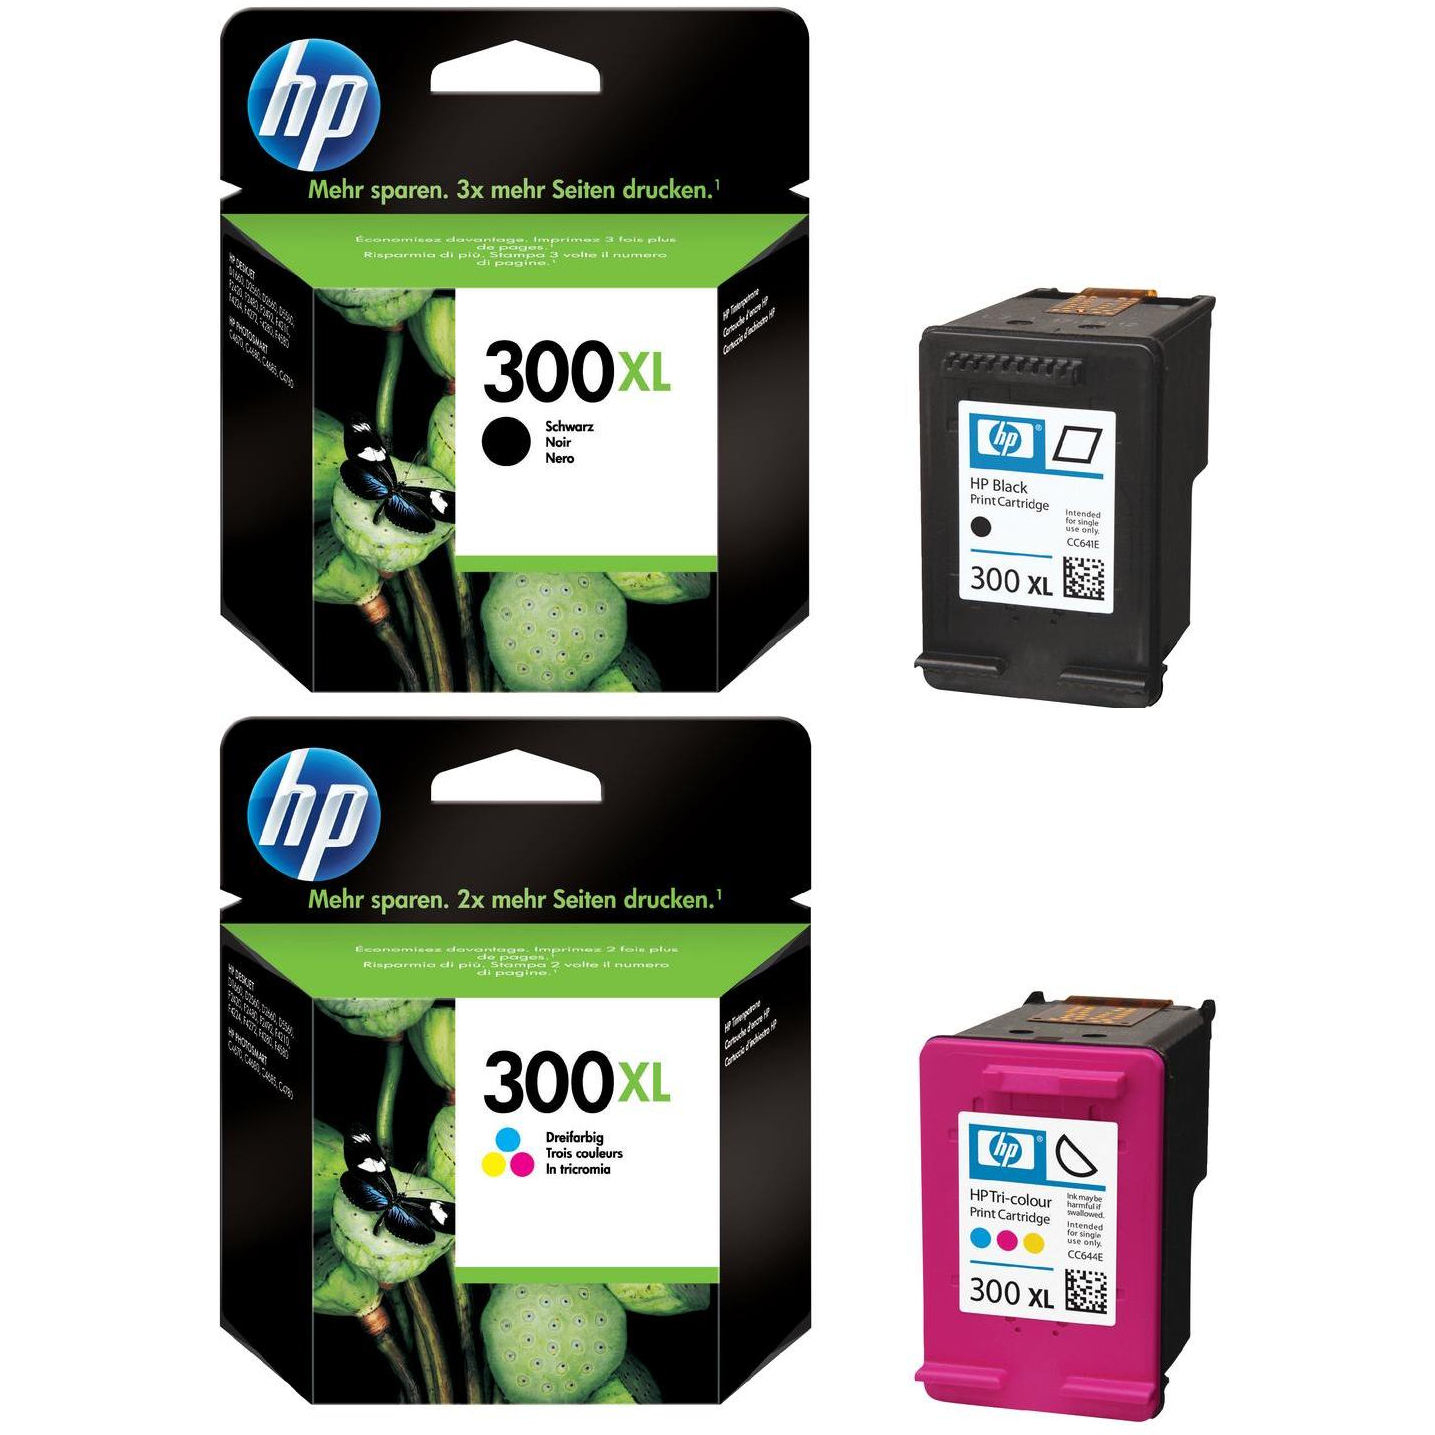 Related to HP 4280 Ink: HP-300XL-Pack